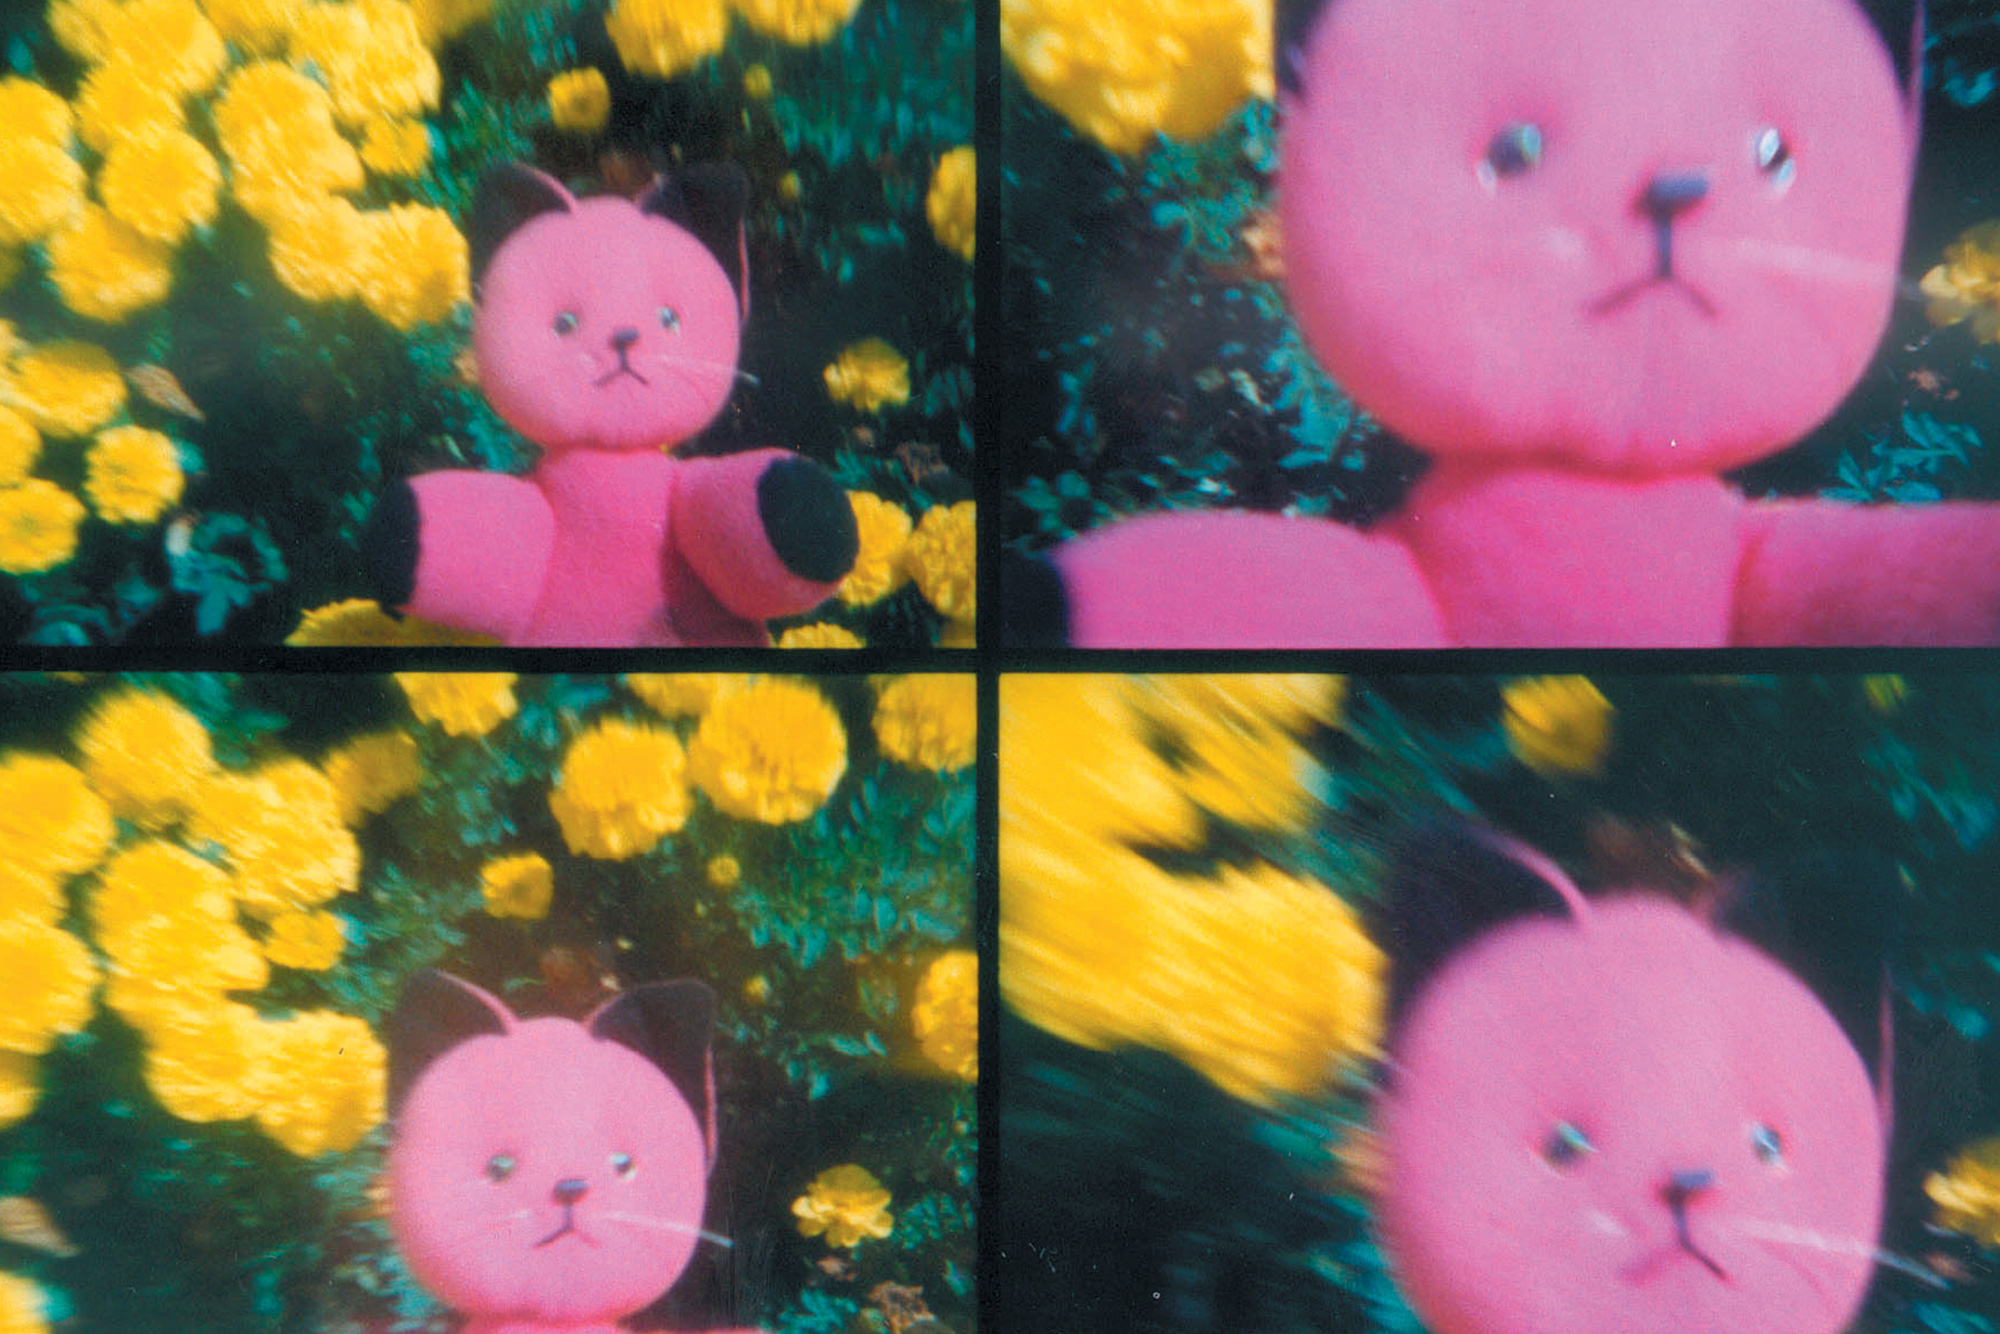 Four Lomographic images depicting a pink stuffed cat doll in front of yellow flowers.